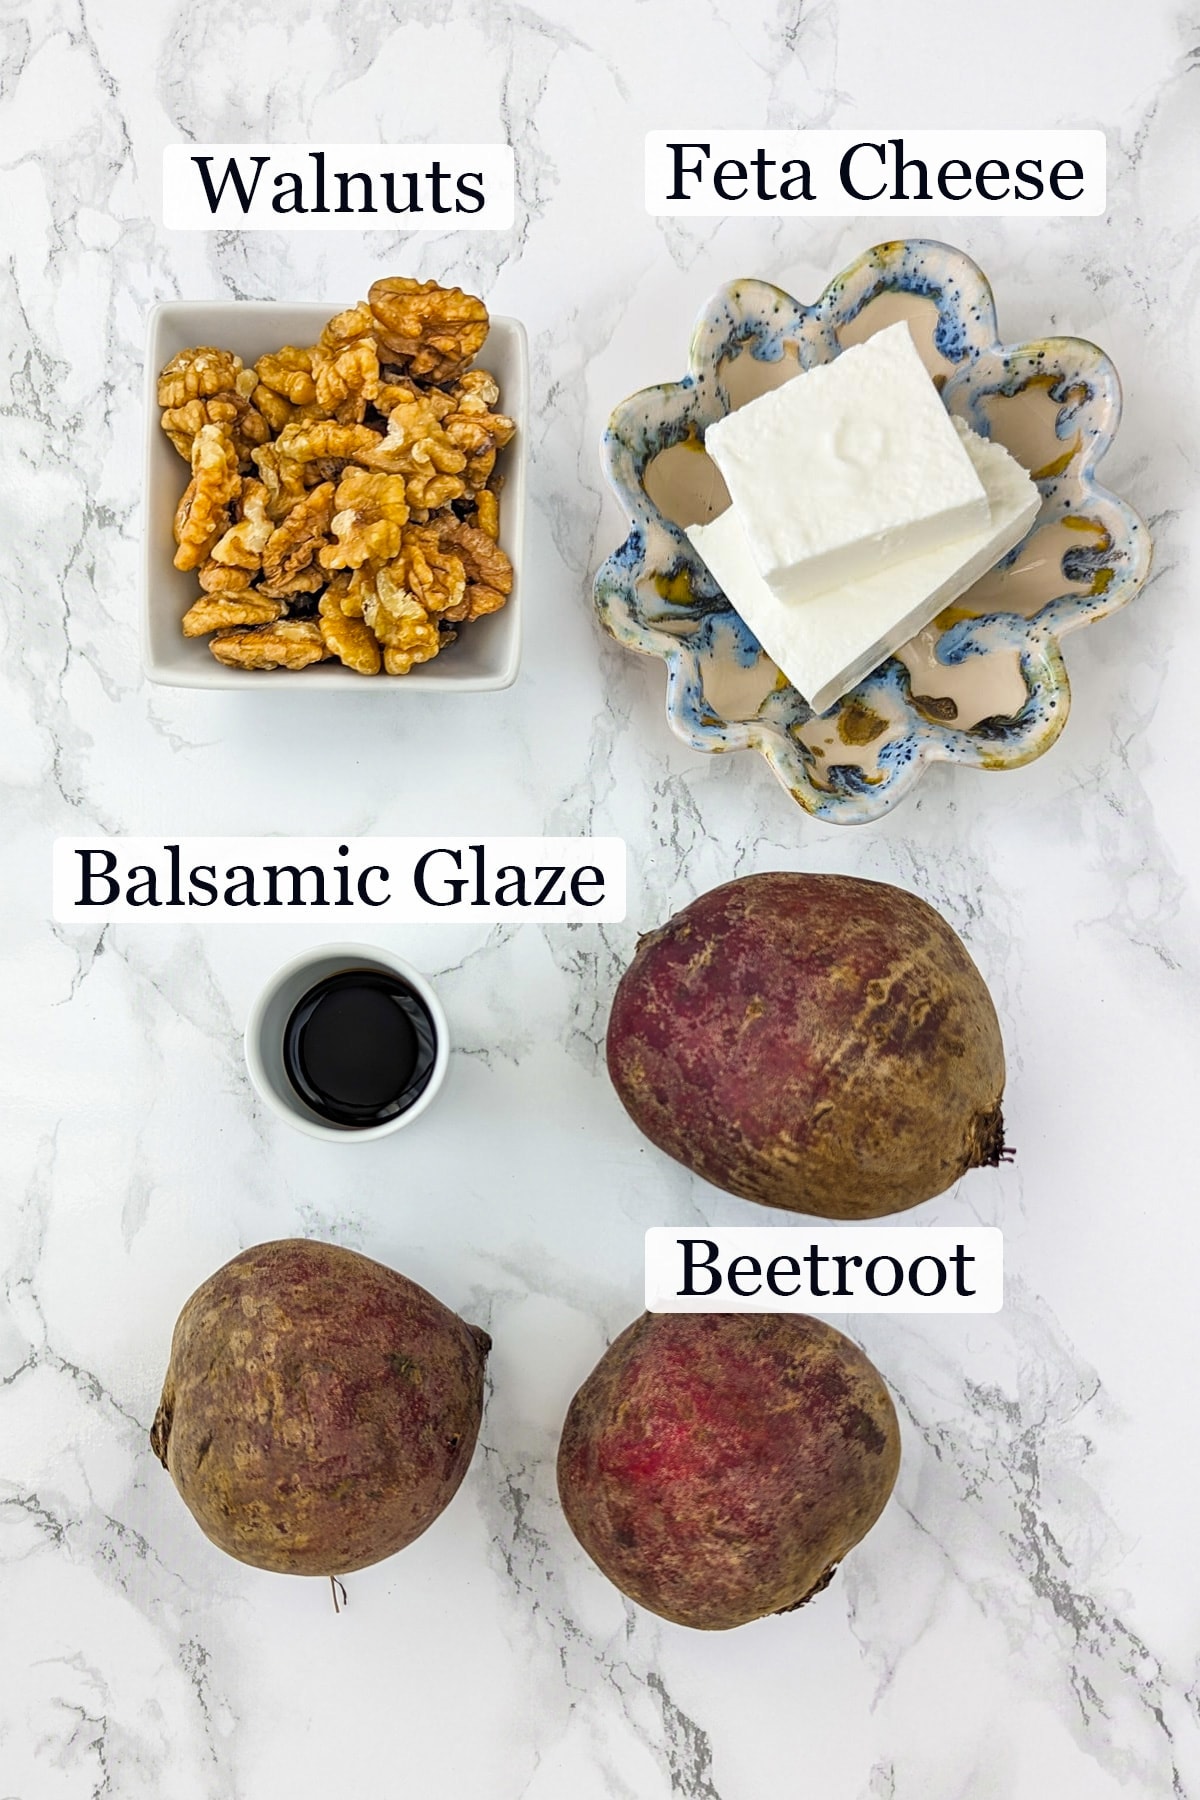 3 Beets, balsamic glaze, brie cheese and walnuts on a white marble surface.